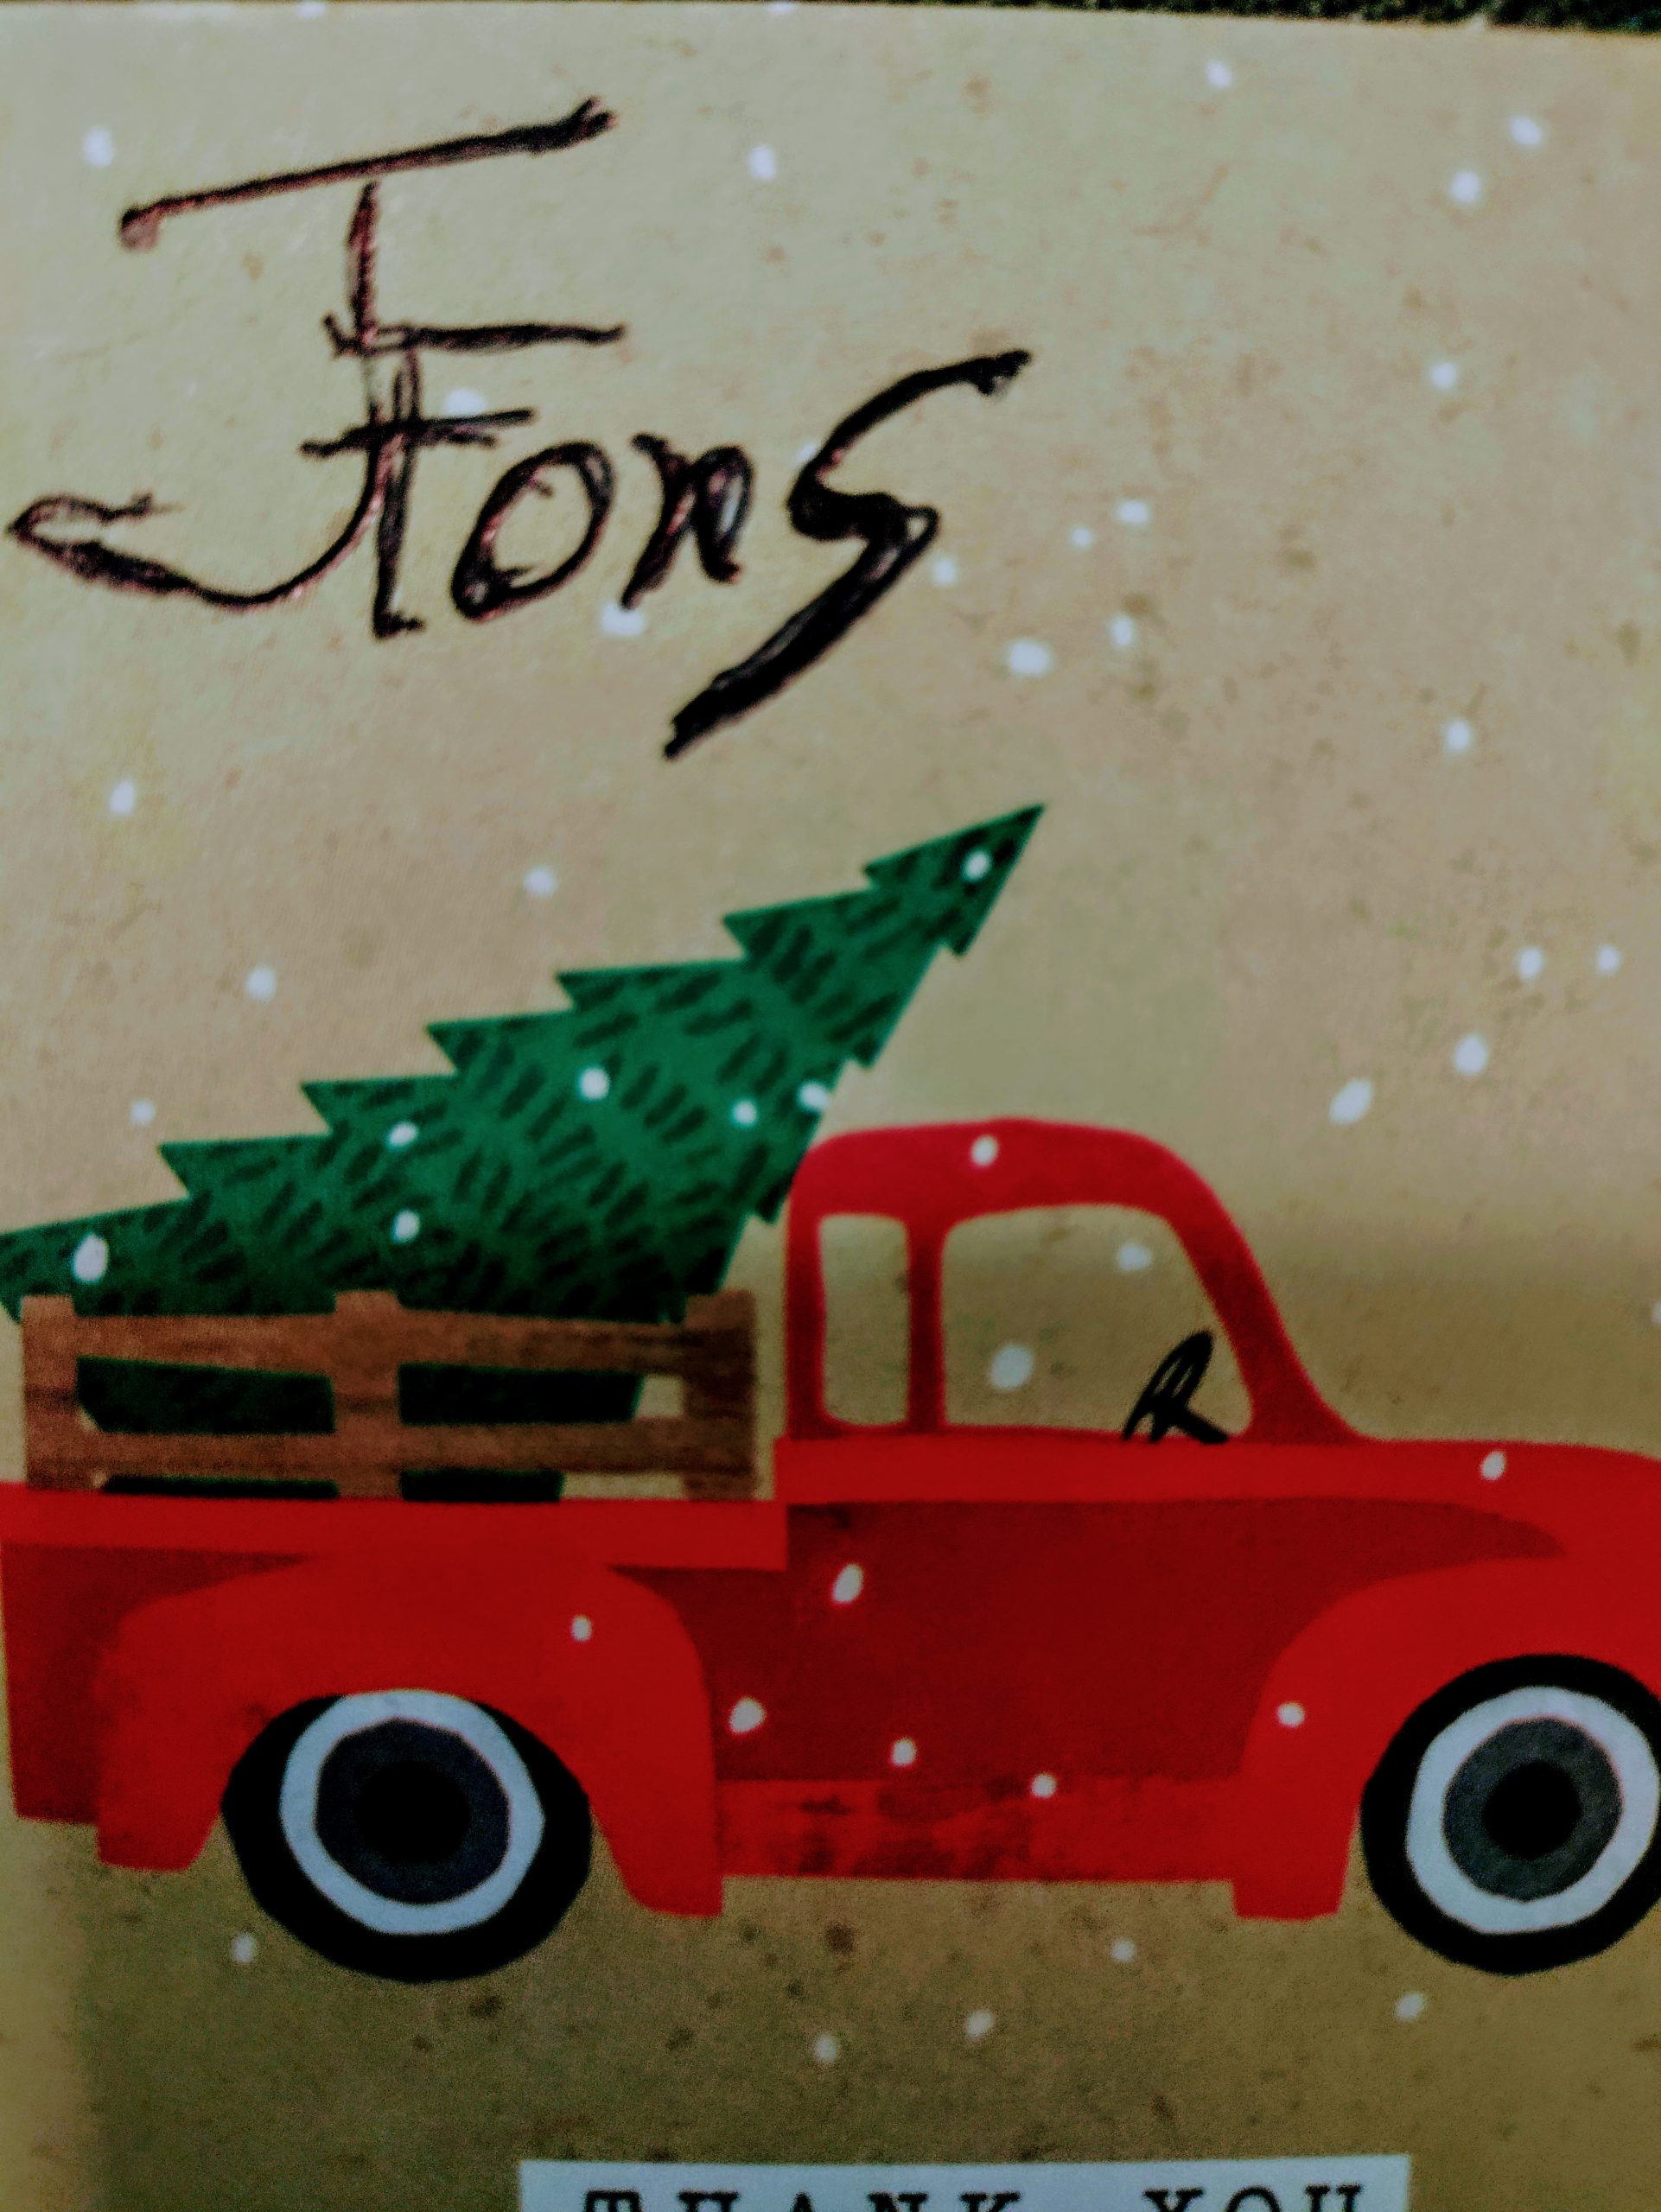 Celebrating Family, Music, and Giving: Jfons’ Festive Ode to Christmas 2023